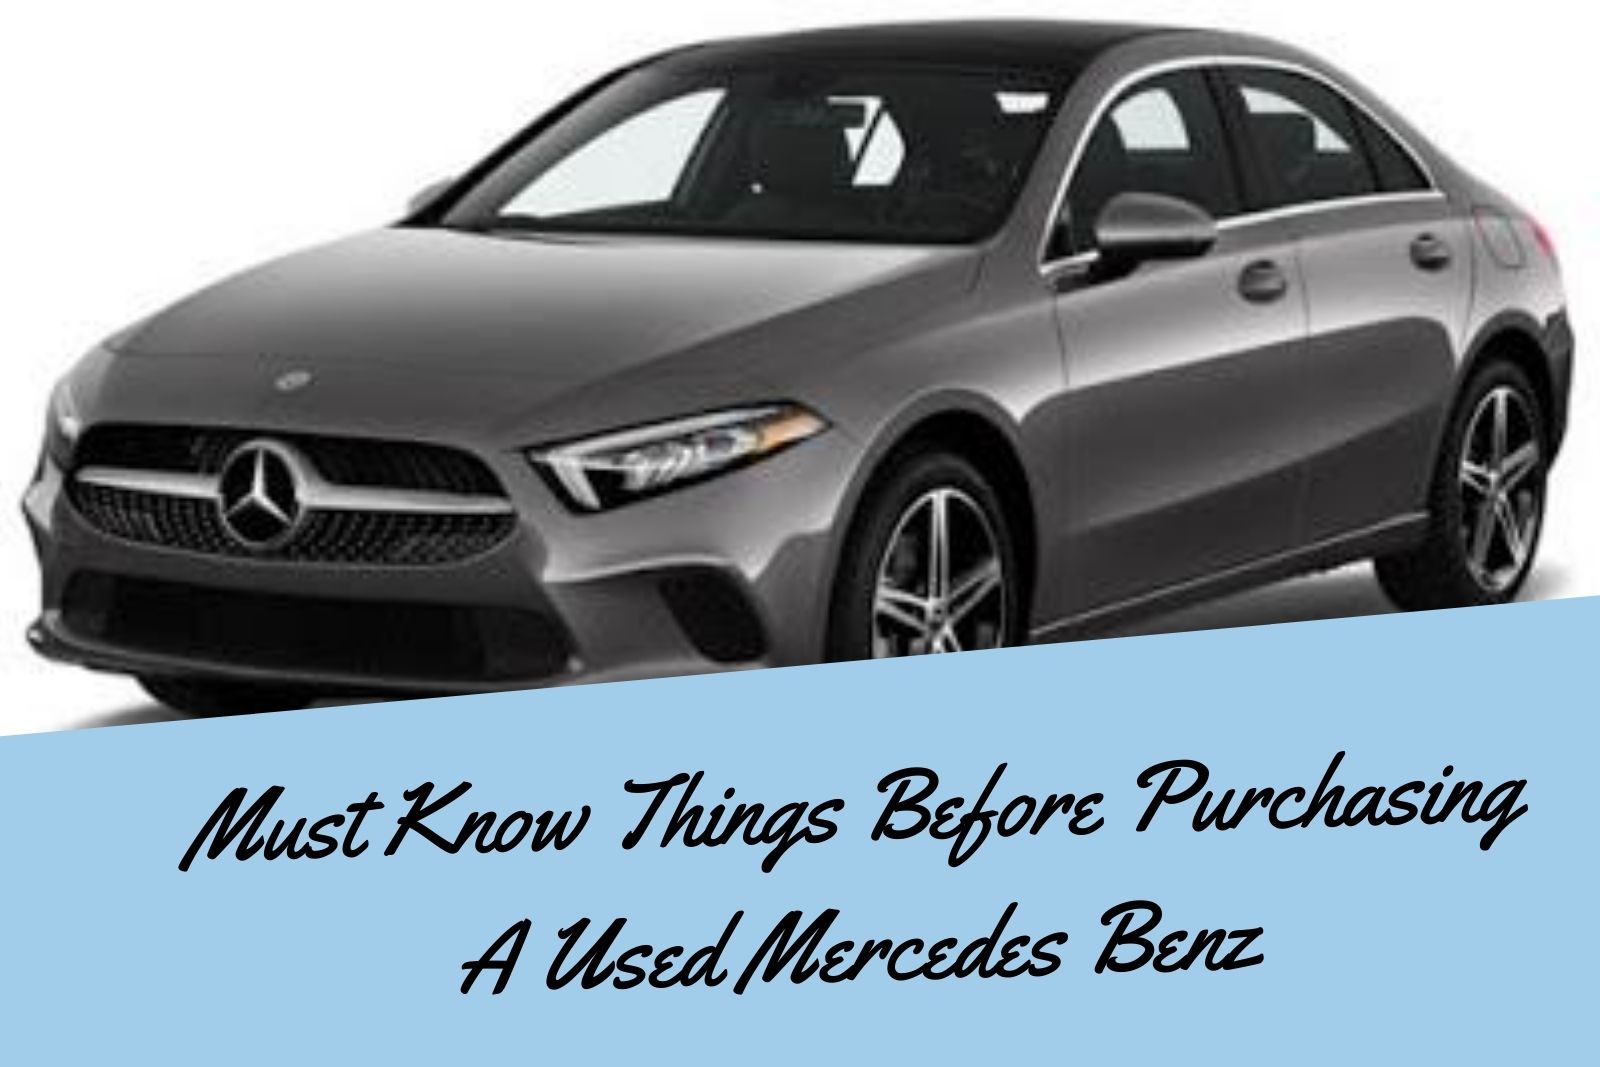 Must Know Things Before Purchasing A Used Mercedes Benz